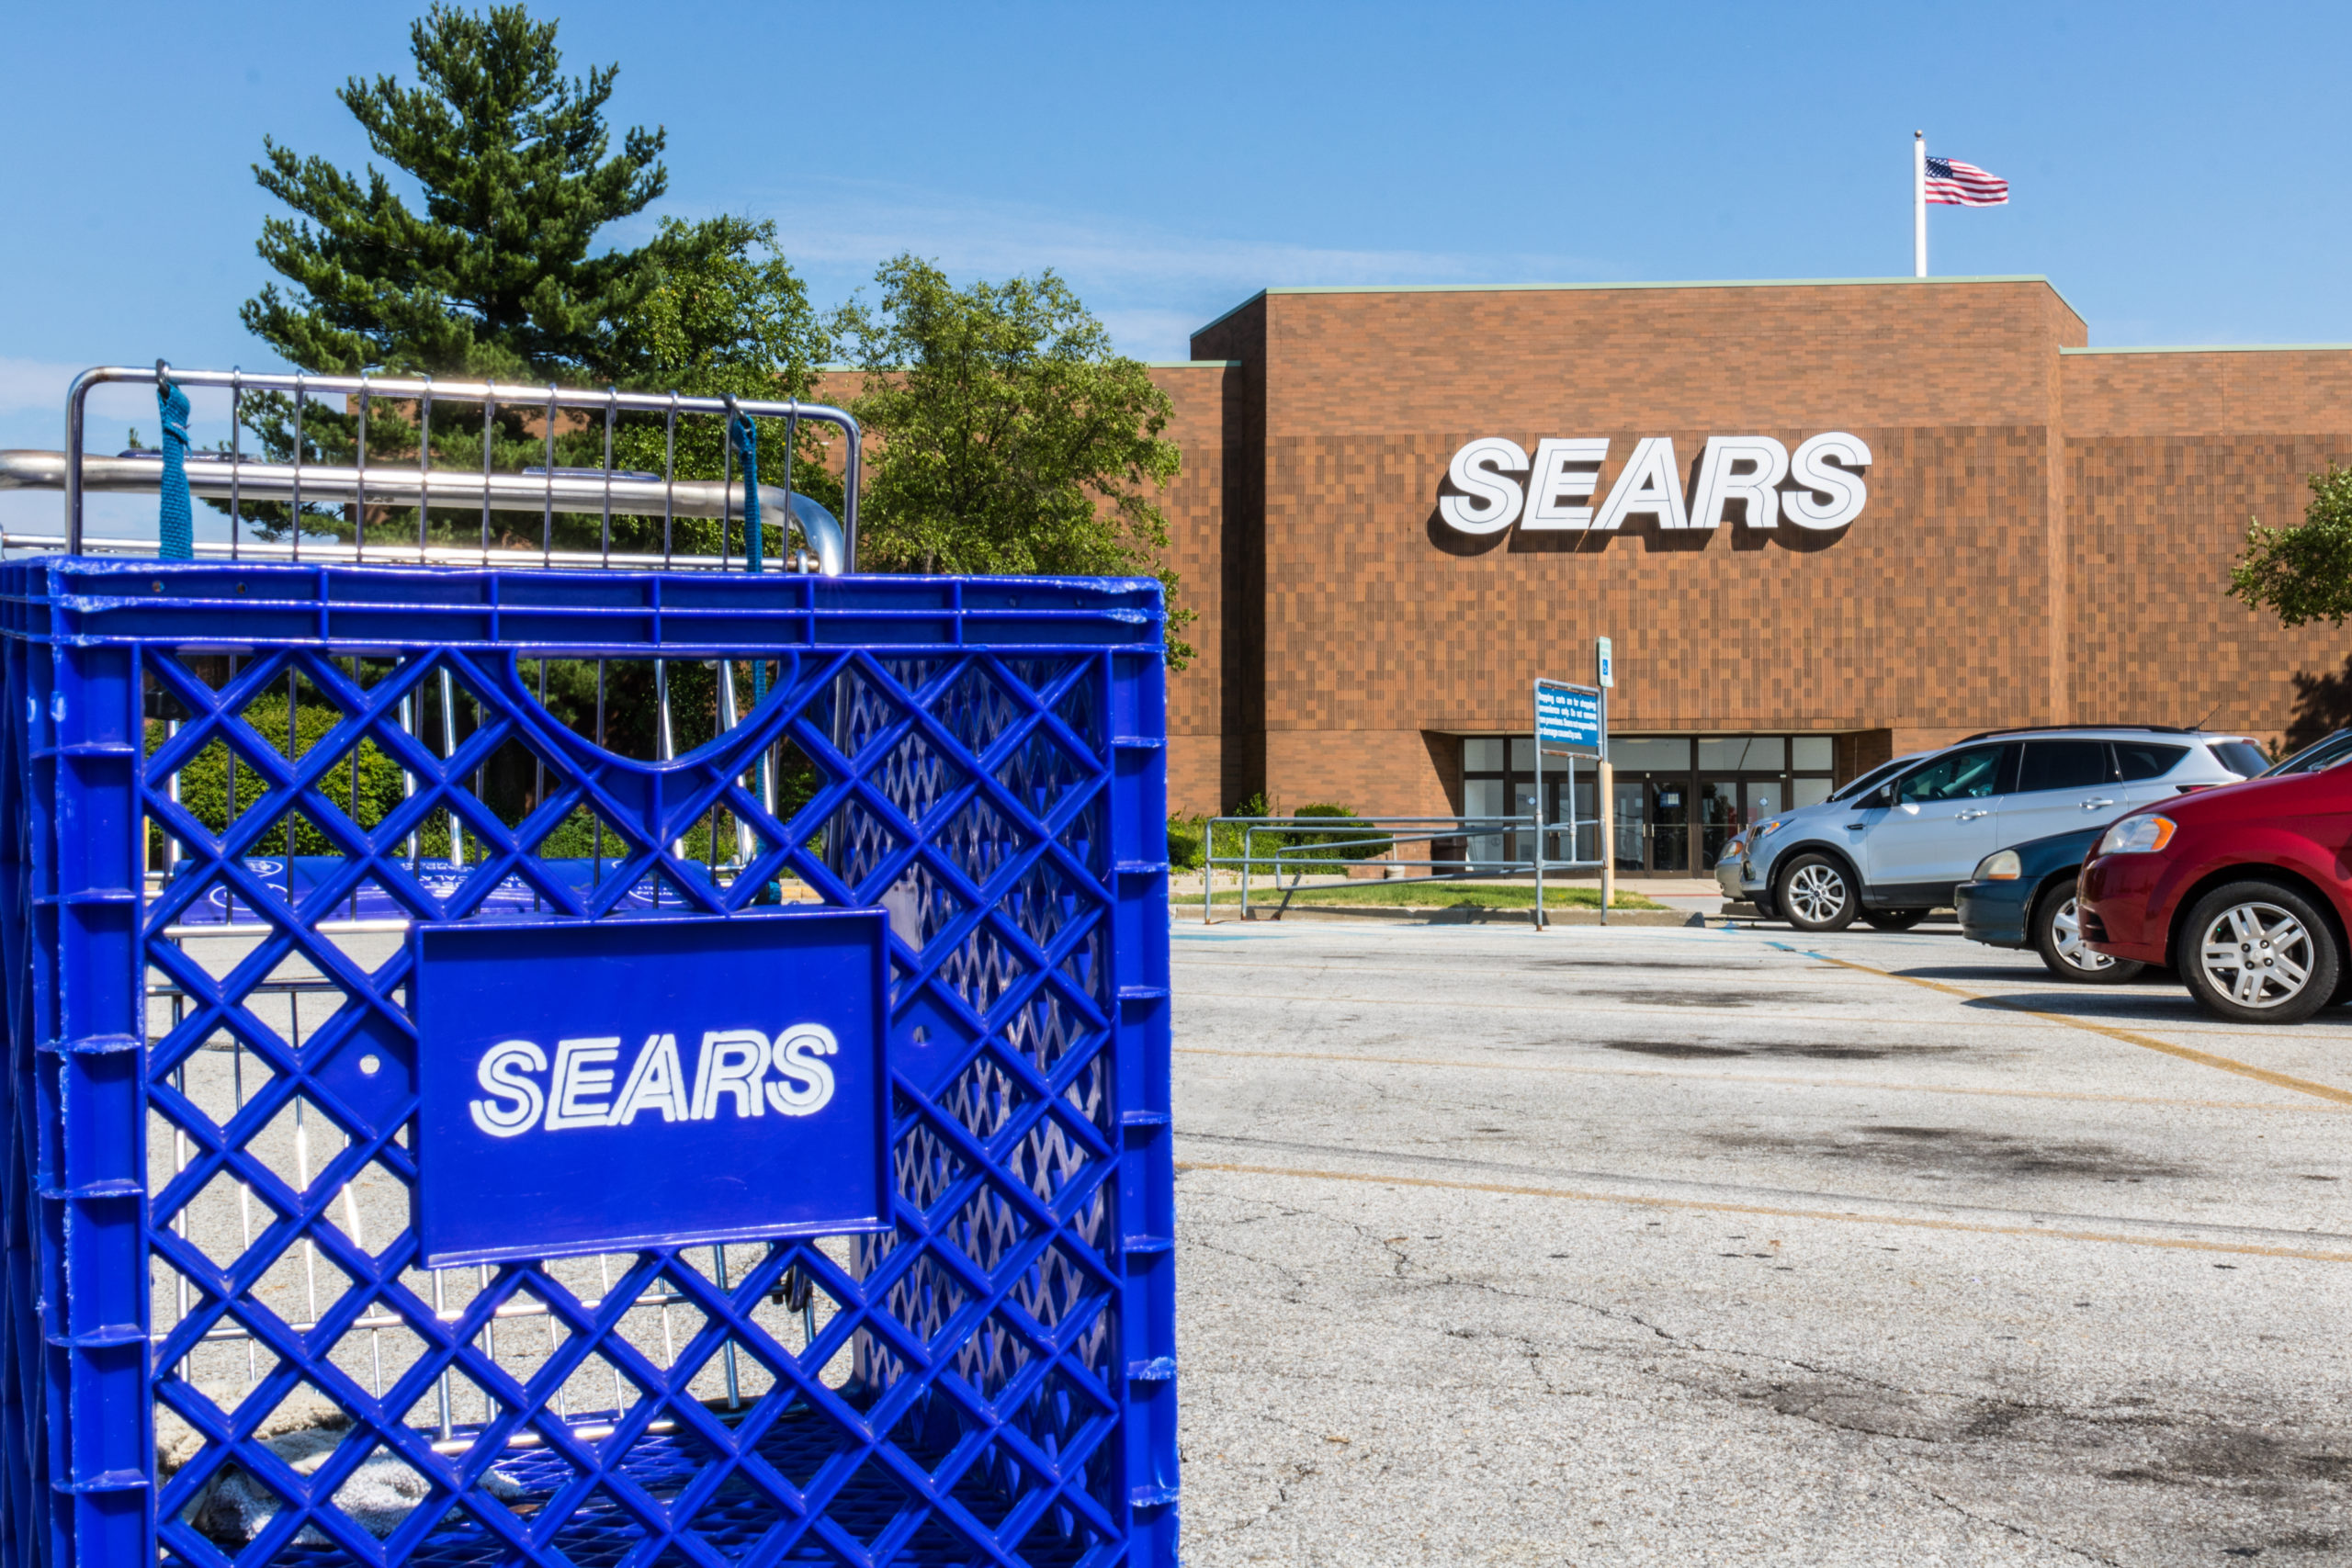 Sears Hometown Files for Bankruptcy